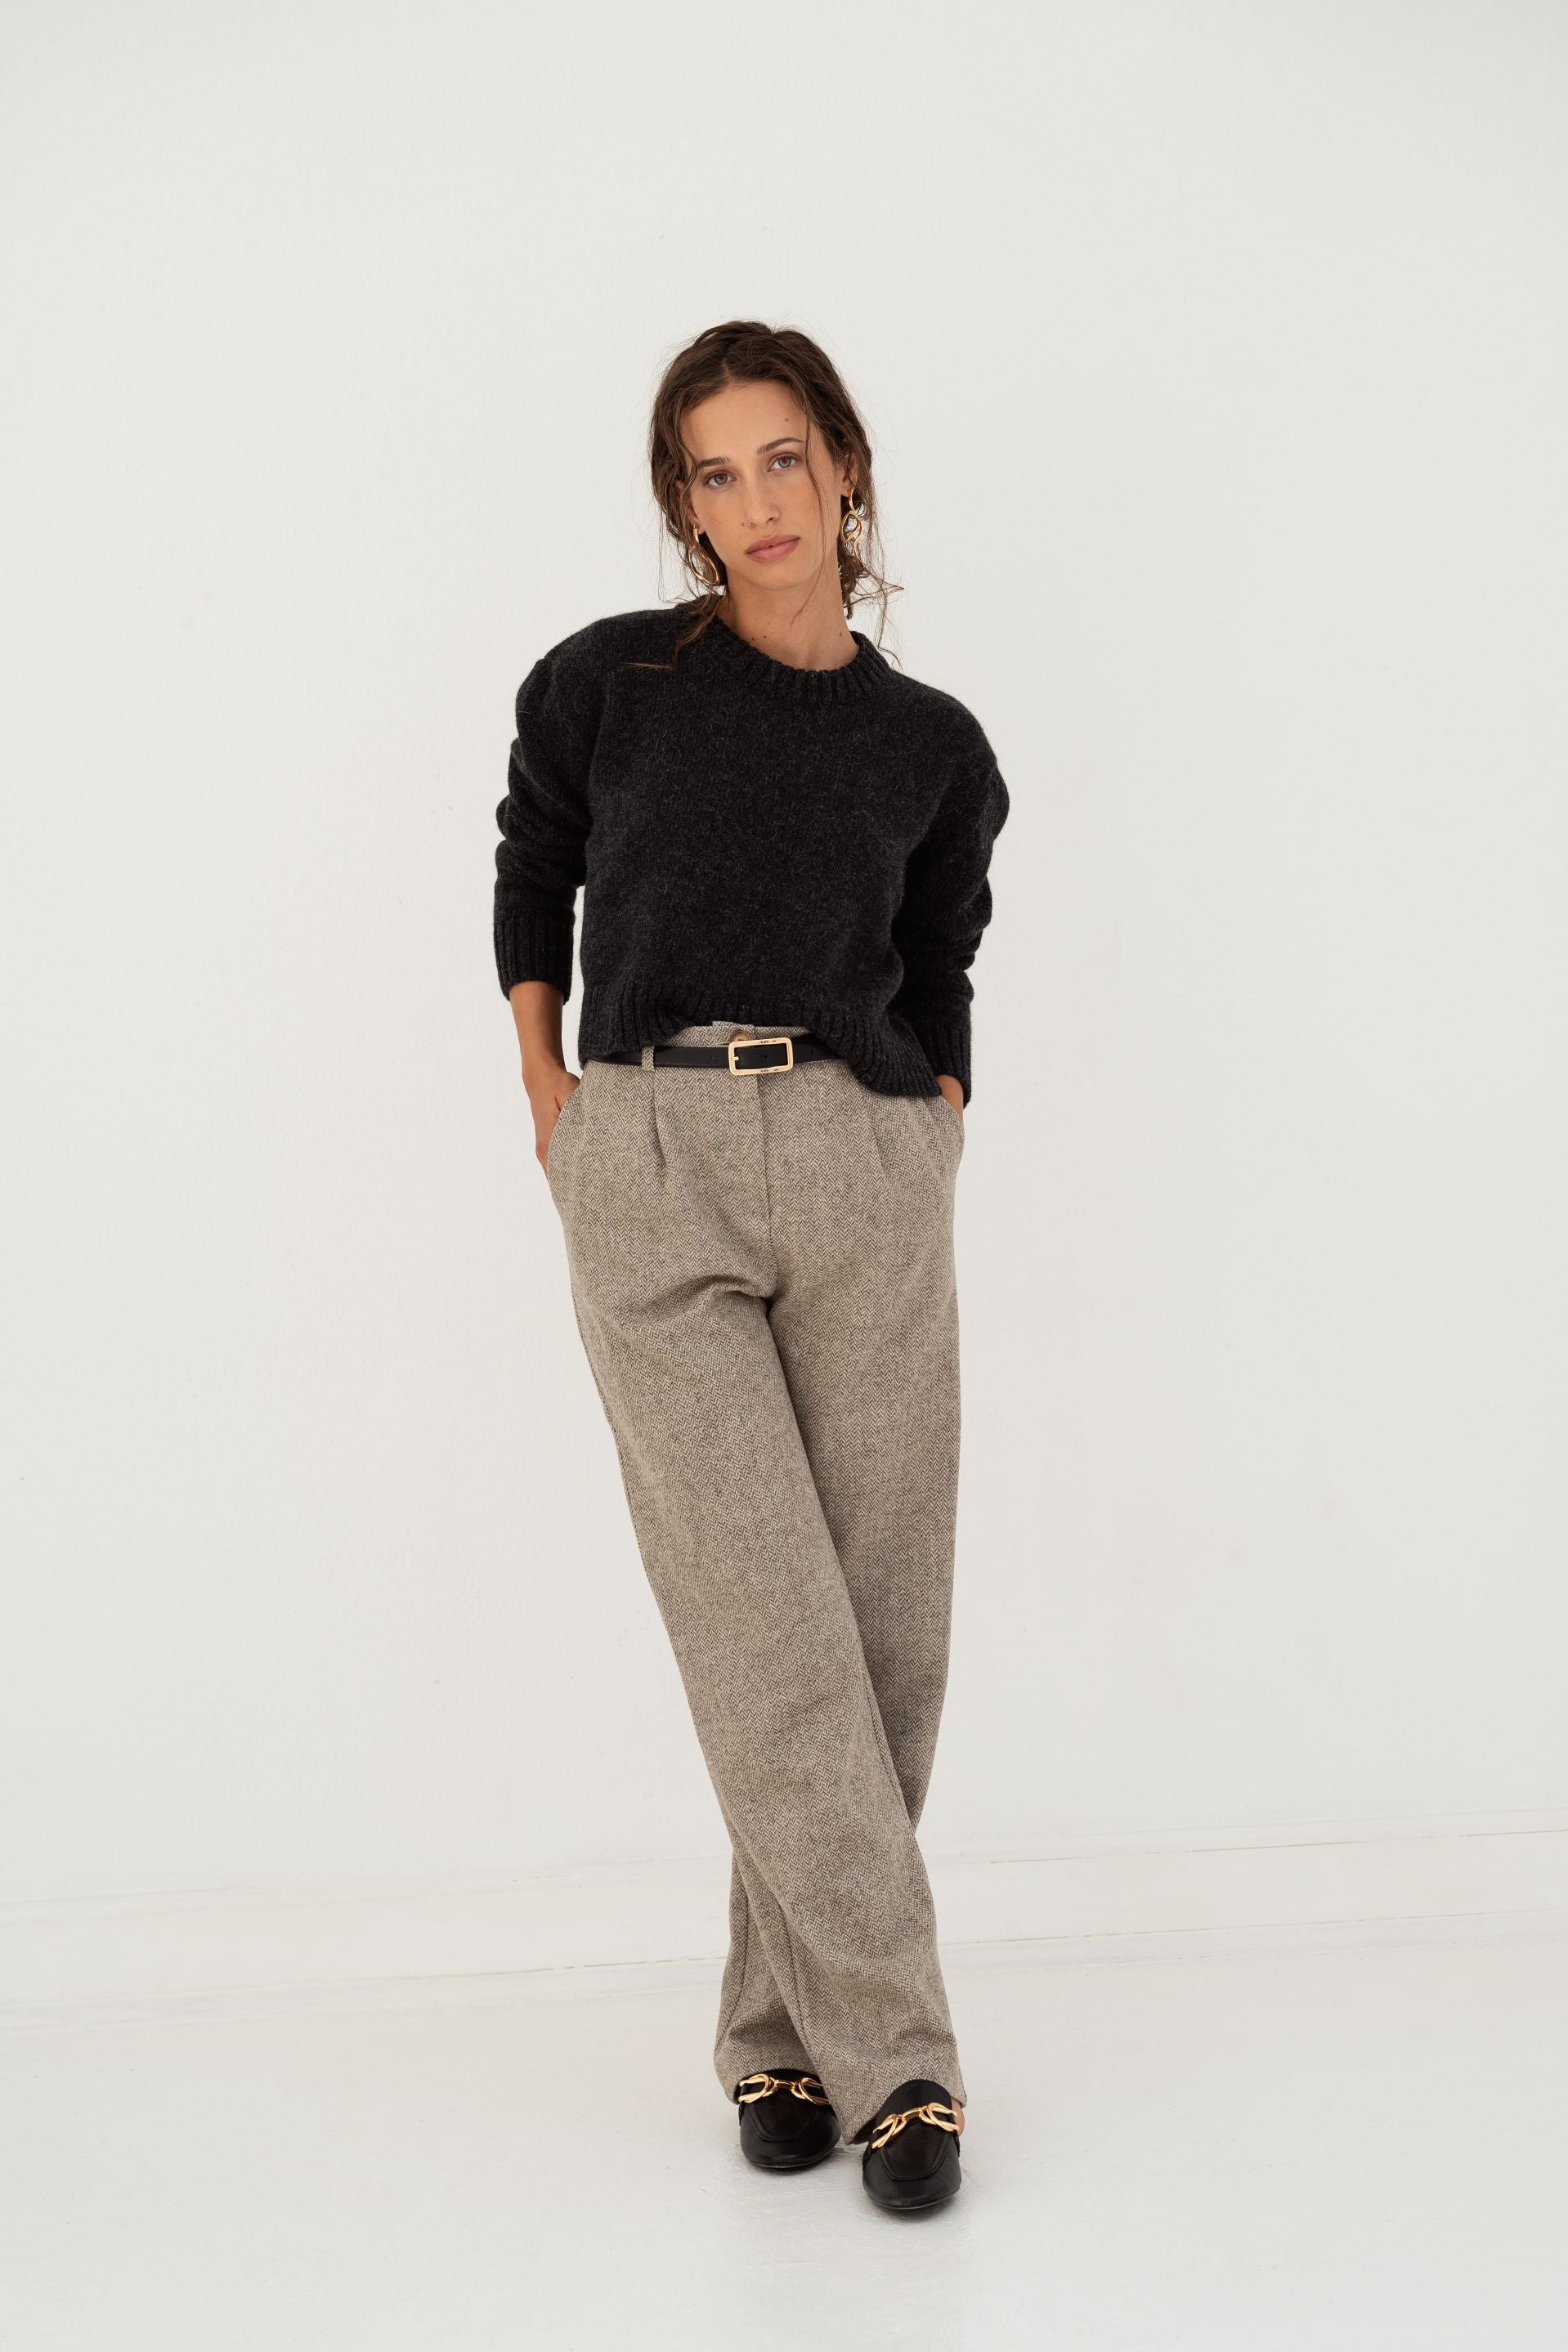 Naz women's wool trousers: Straight-fit, lined, and made in Portugal.